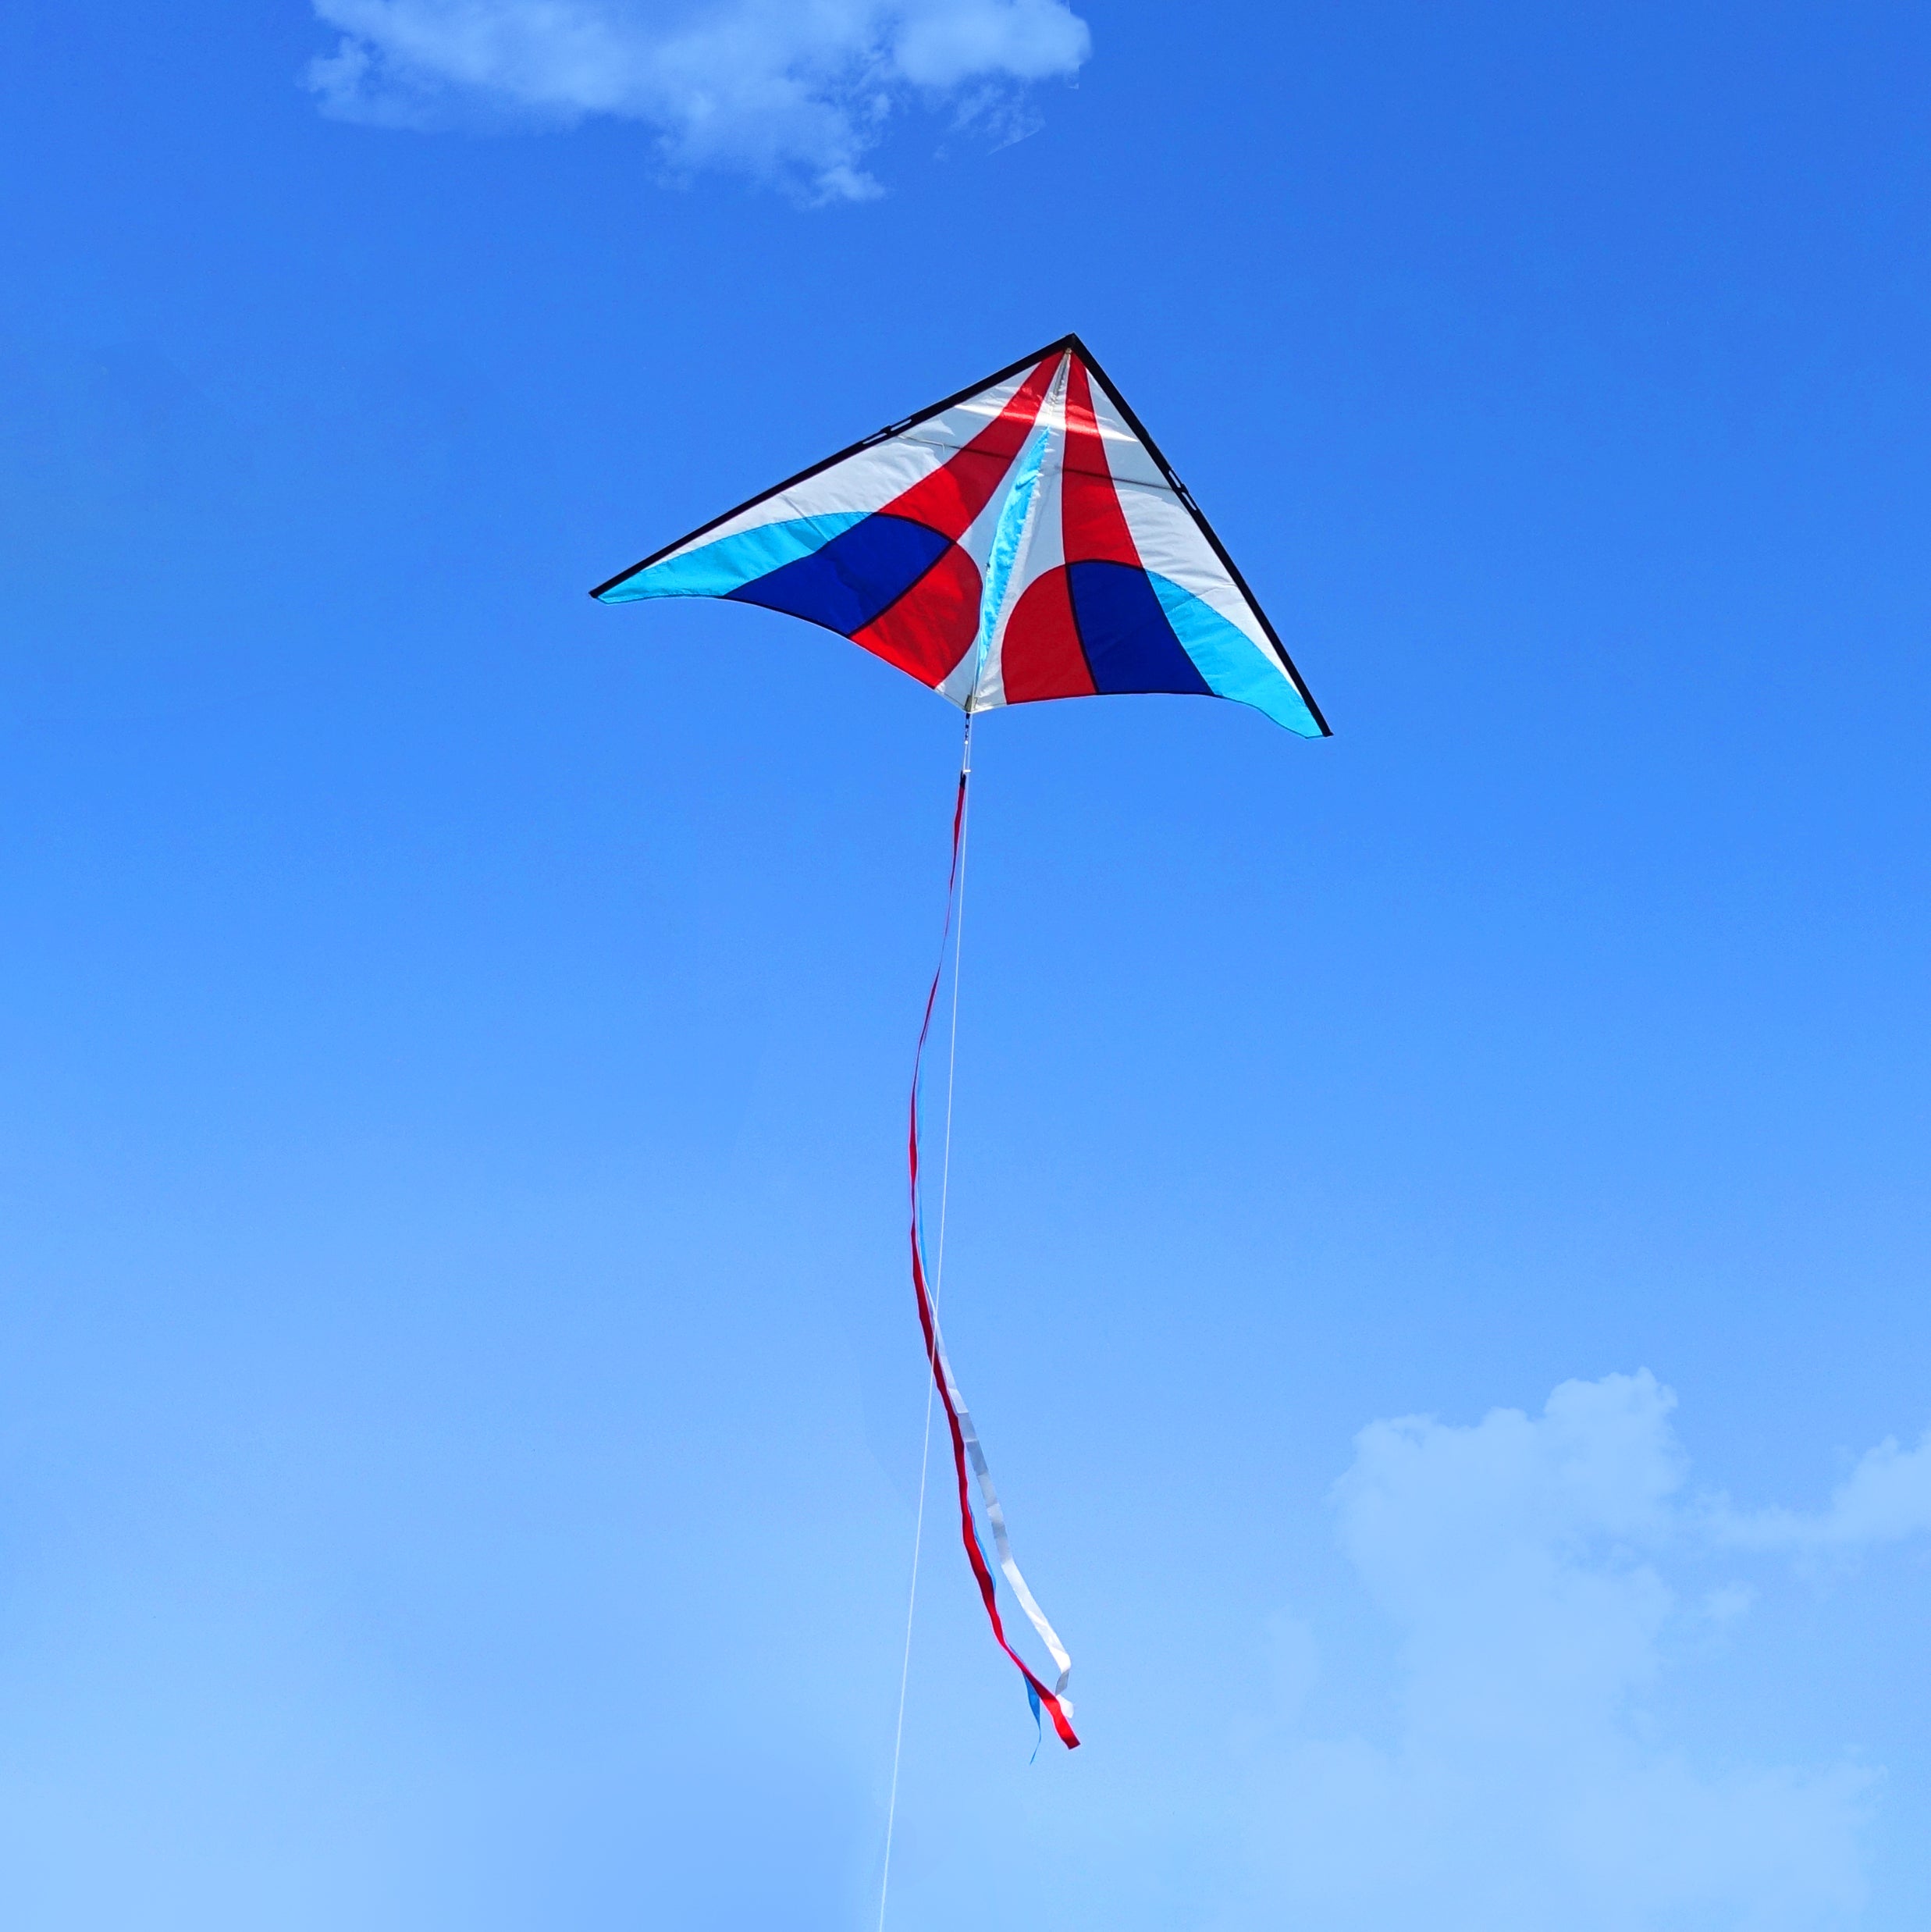  Customer reviews: emma kites Holiday Delta Kite 60-in Kite for  All Beginner Kite Easy to Fly Simple to Assemble Fun Activities for Kids  and Adults to Enjoy Outings at Beach Park (